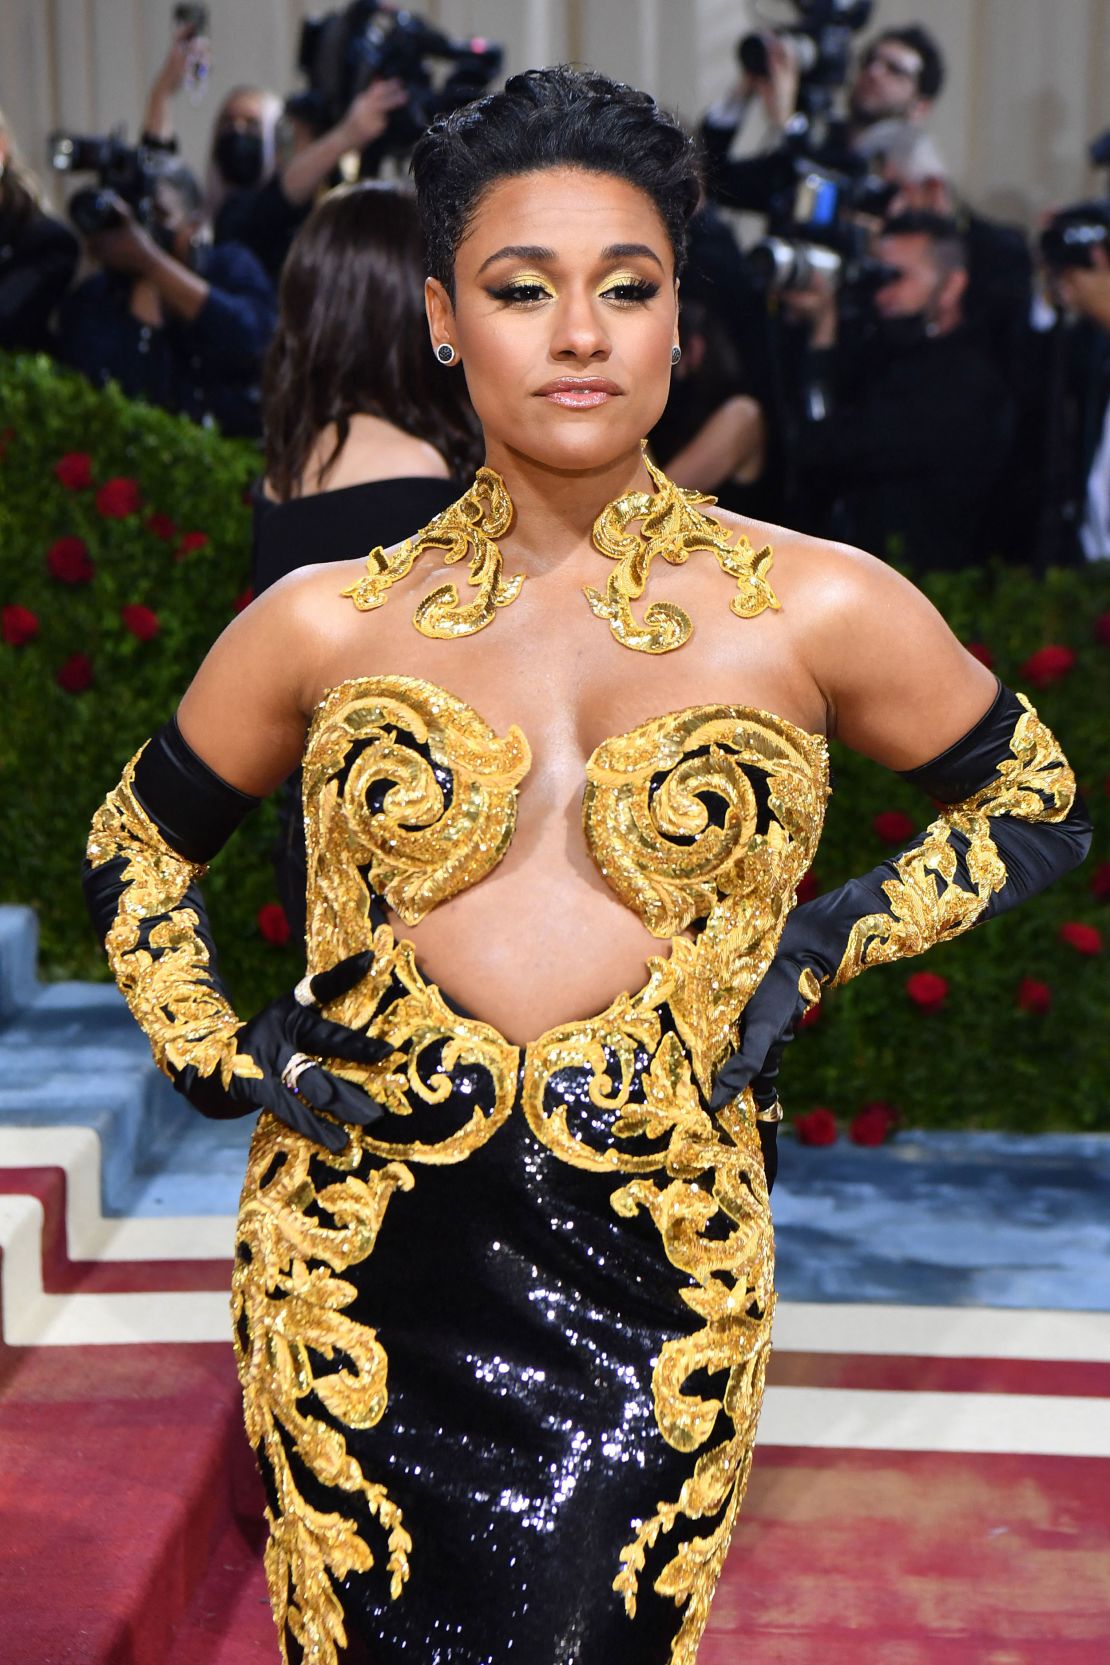 West Side Story star Ariana DeBose added a dose of glamour to her black and golden Moschino outfit with a pair of opera gloves and jewelry inspired by her gown's swirling motif. 